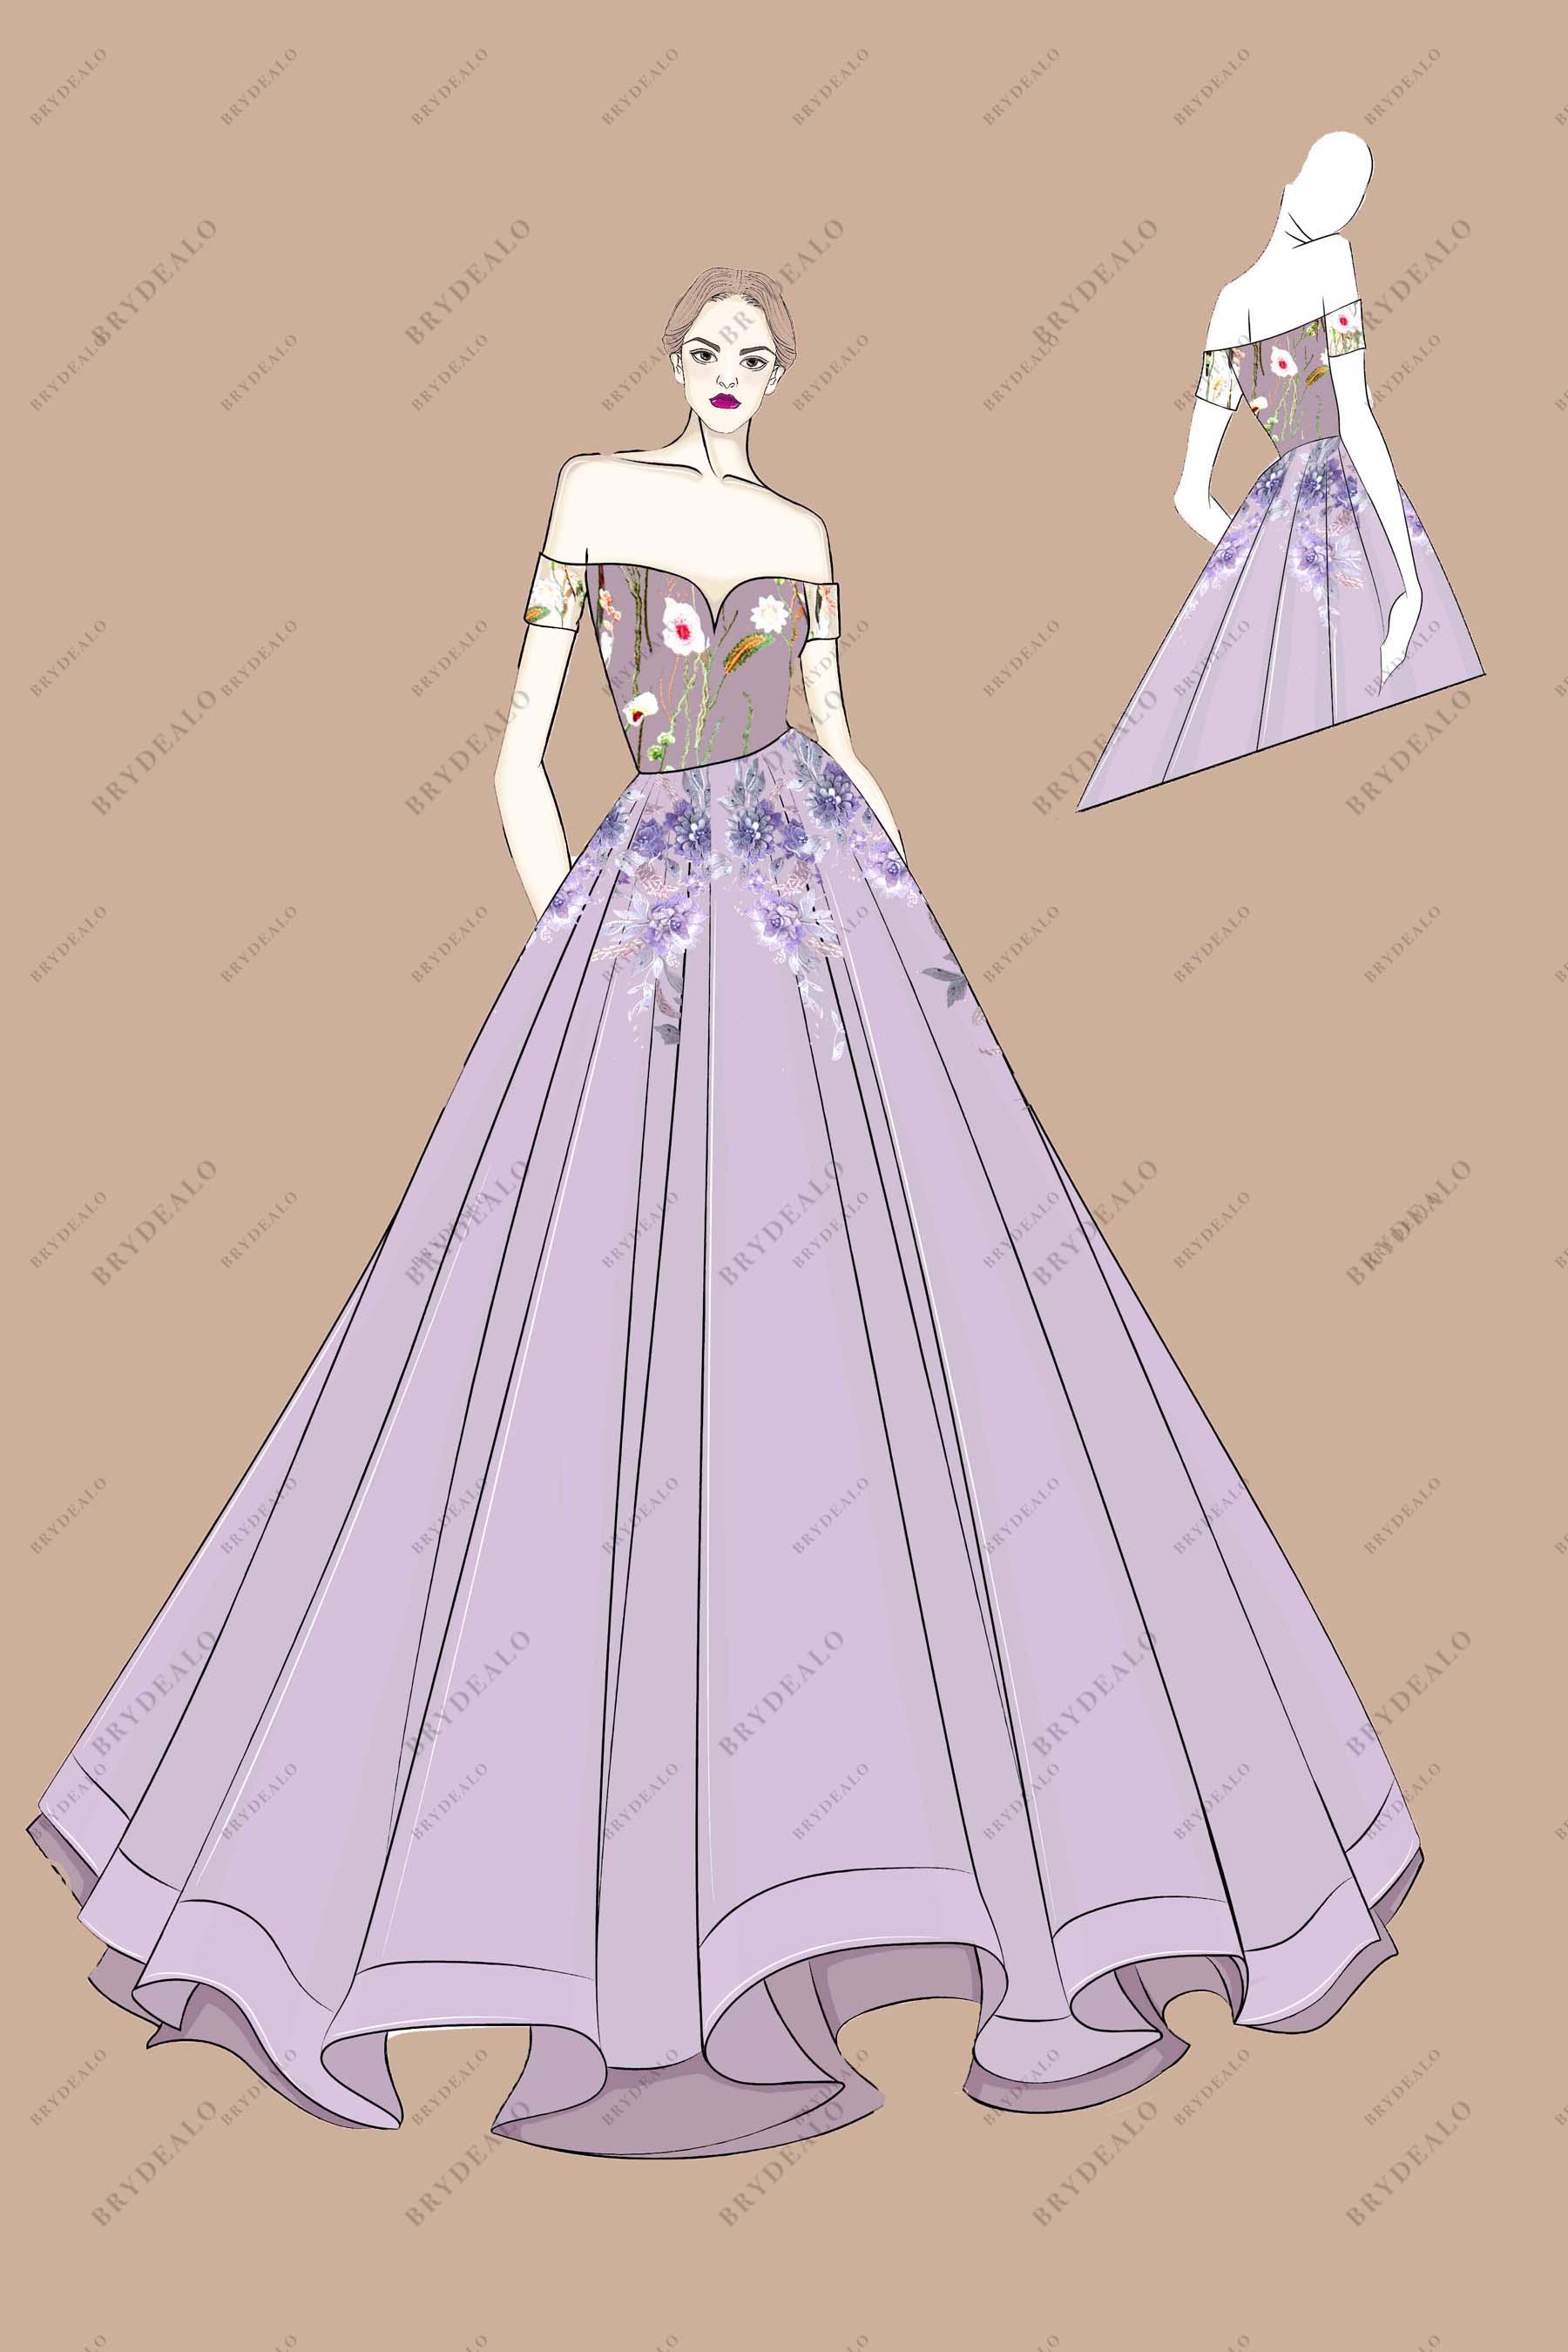 Prom Dress Drawing Vector Images over 120